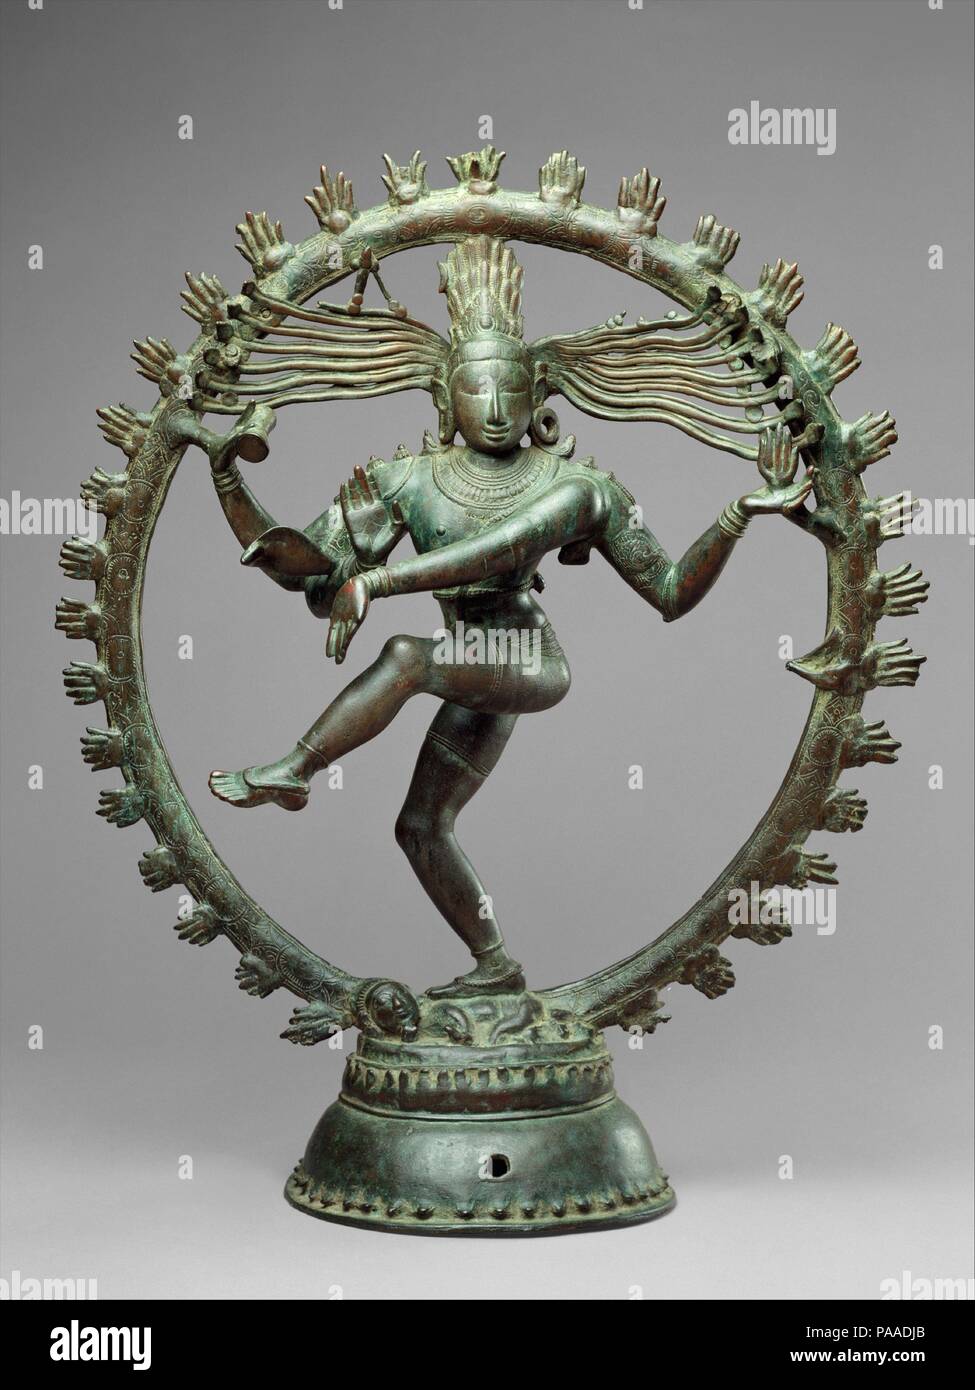 Shiva as Lord of Dance (Nataraja). Culture: Indian (Tamil Nadu). Dimensions: H. 26 7/8 in. (68.3 cm); Diam. 22 1/4 in. (56.5 cm). Date: ca. 11th century.  As a symbol, Shiva Nataraja is a brilliant invention. It combines in a single image Shiva's roles as creator, preserver, and destroyer of the universe and conveys the Indian conception of the never-ending cycle of time. Although it appeared in sculpture as early as the fifth century, its present, world-famous form evolved under the rule of the Cholas. Shiva's dance is set within a flaming halo. The god holds in his upper right hand the damar Stock Photo